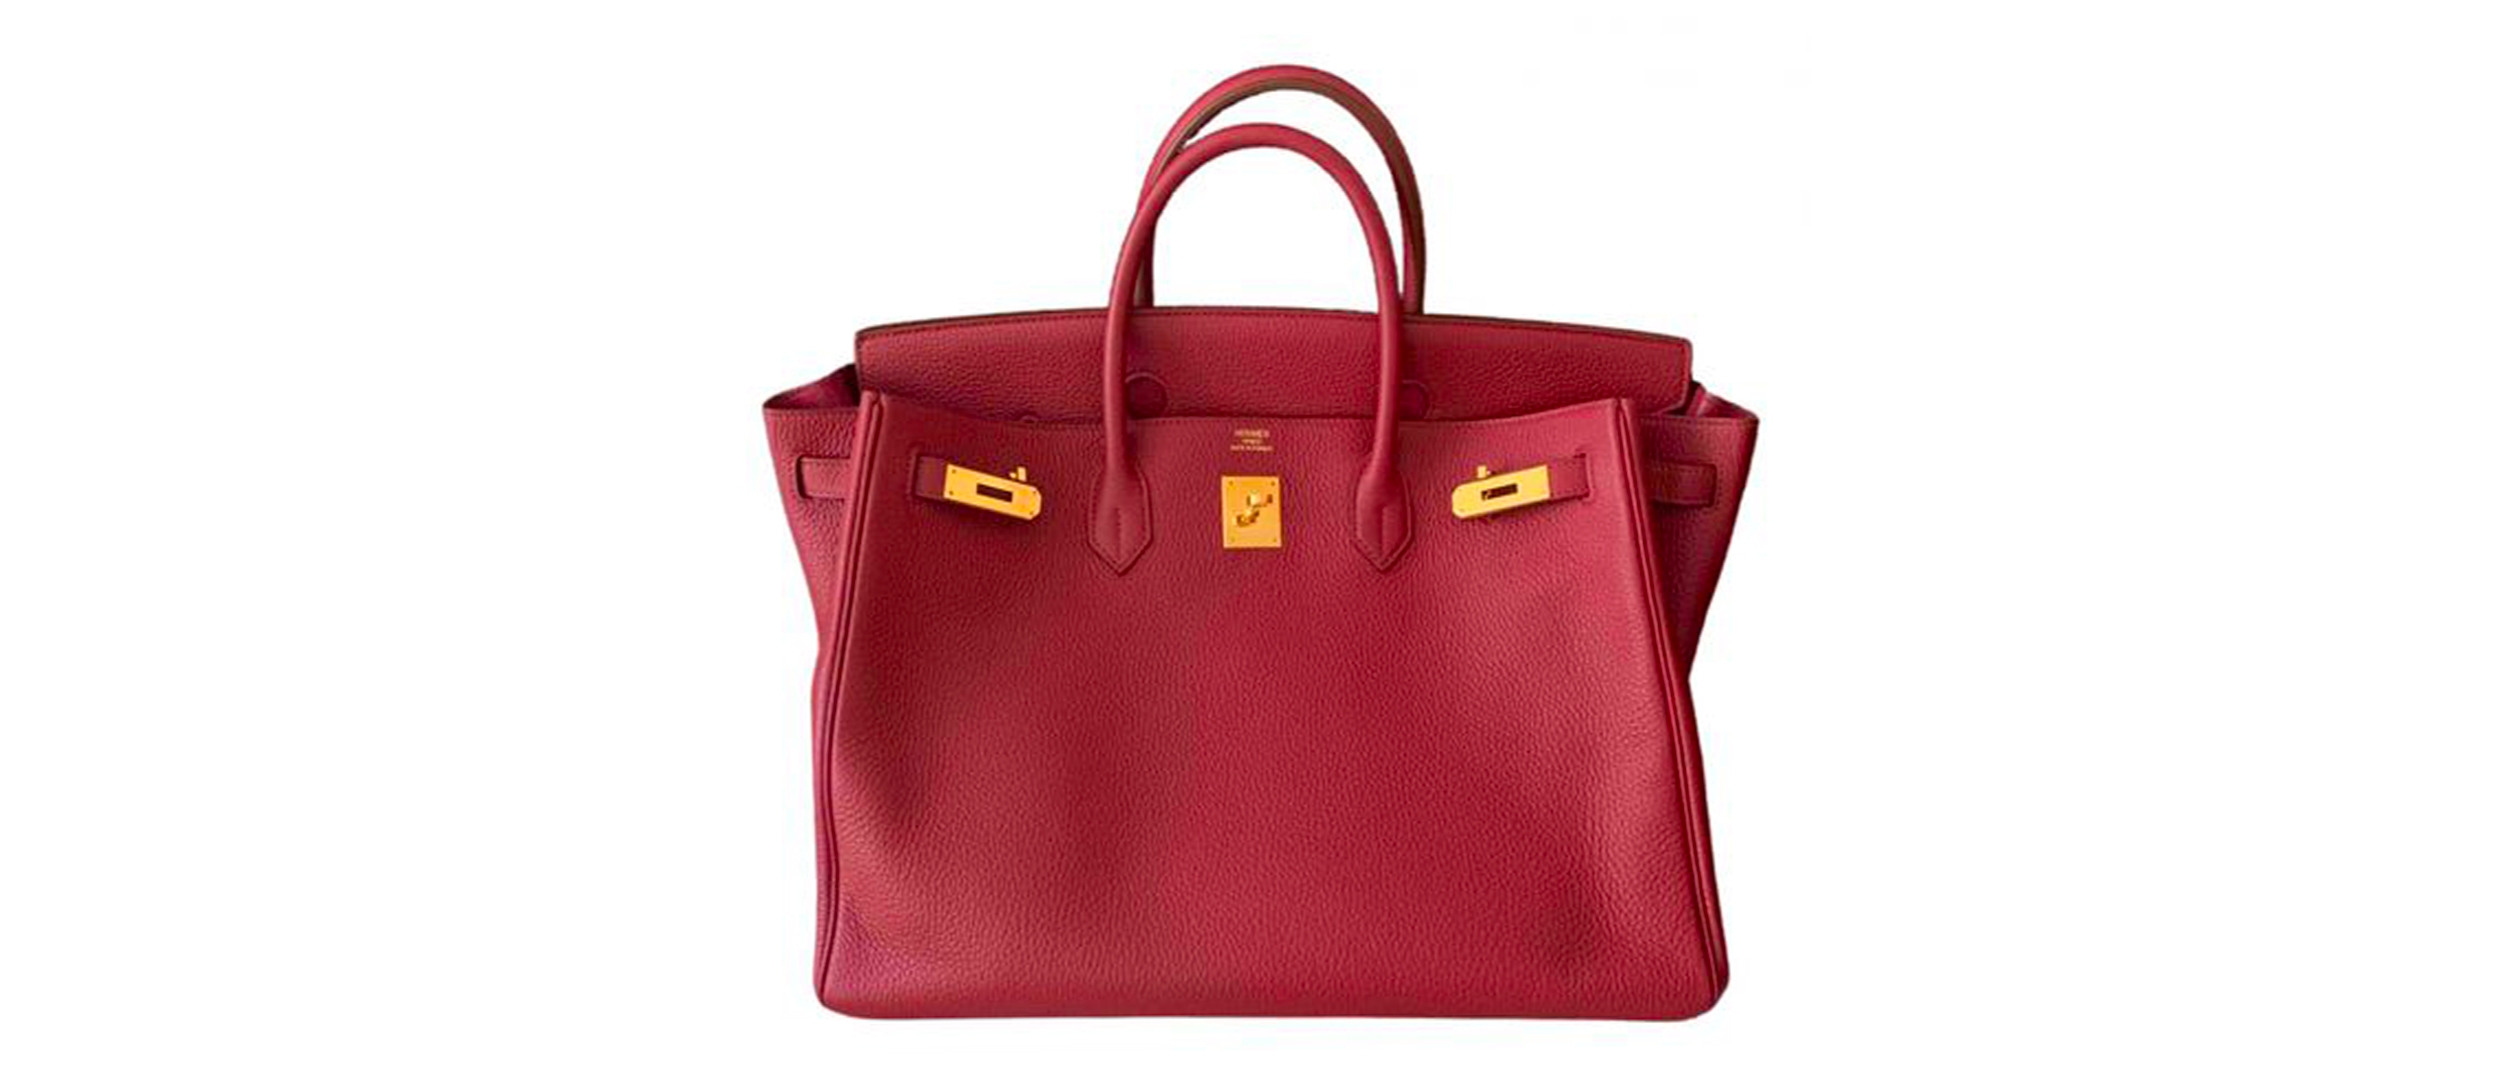 Birkins Are A Better Investment Than Gold or Stocks, Study Says